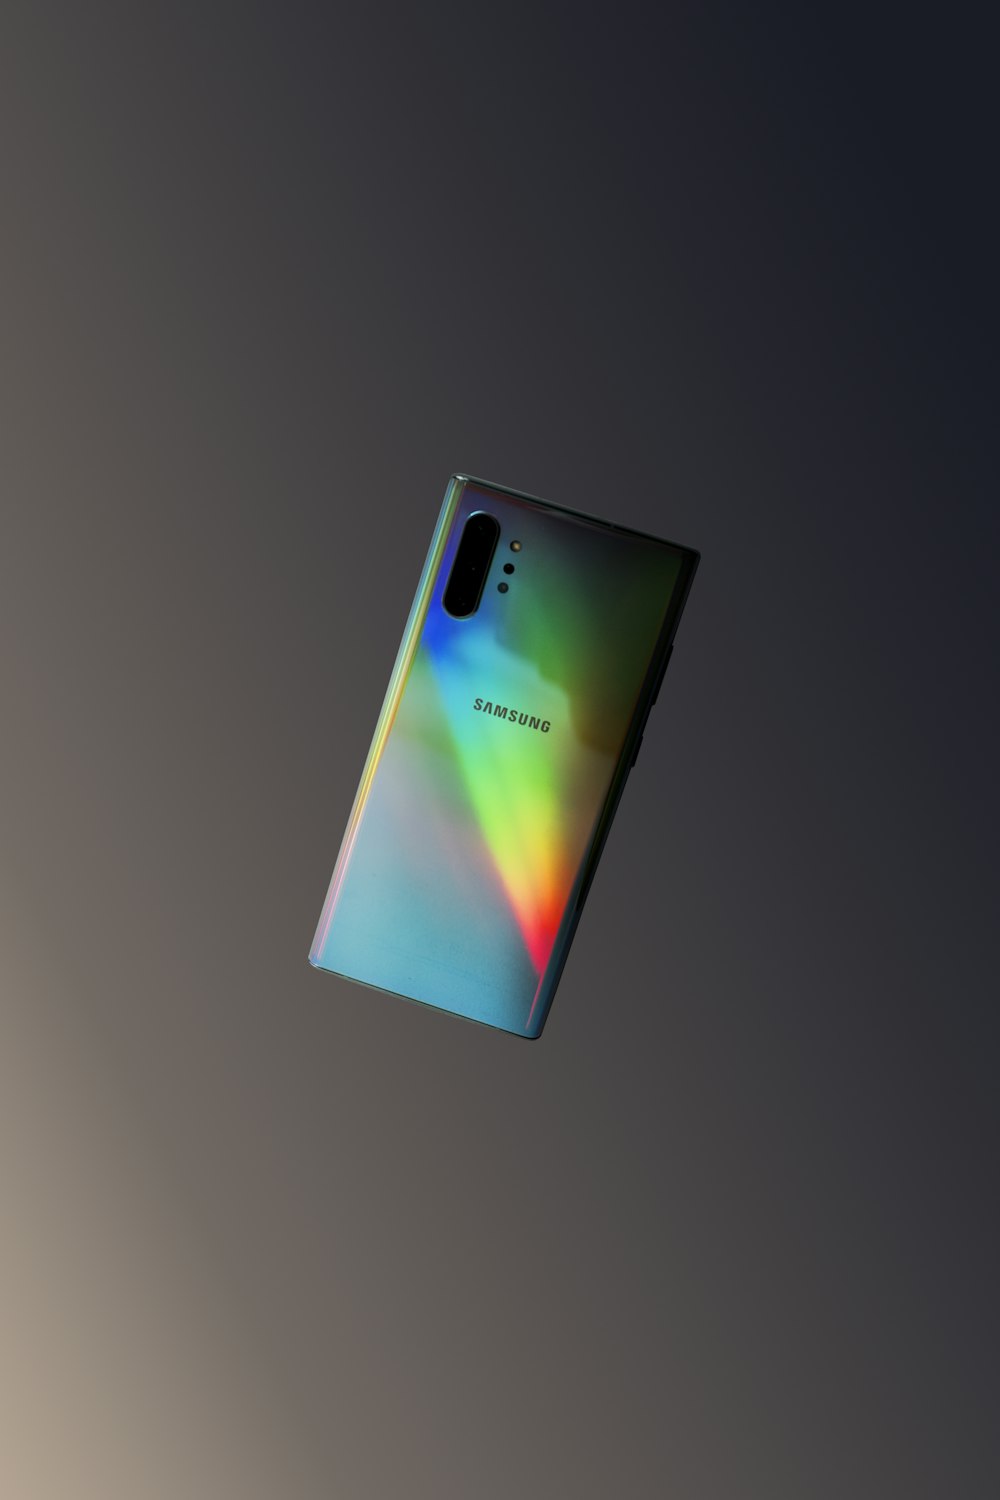 Samsung Galaxy Note 10 Plus Pictures | Download Free Images on Unsplash